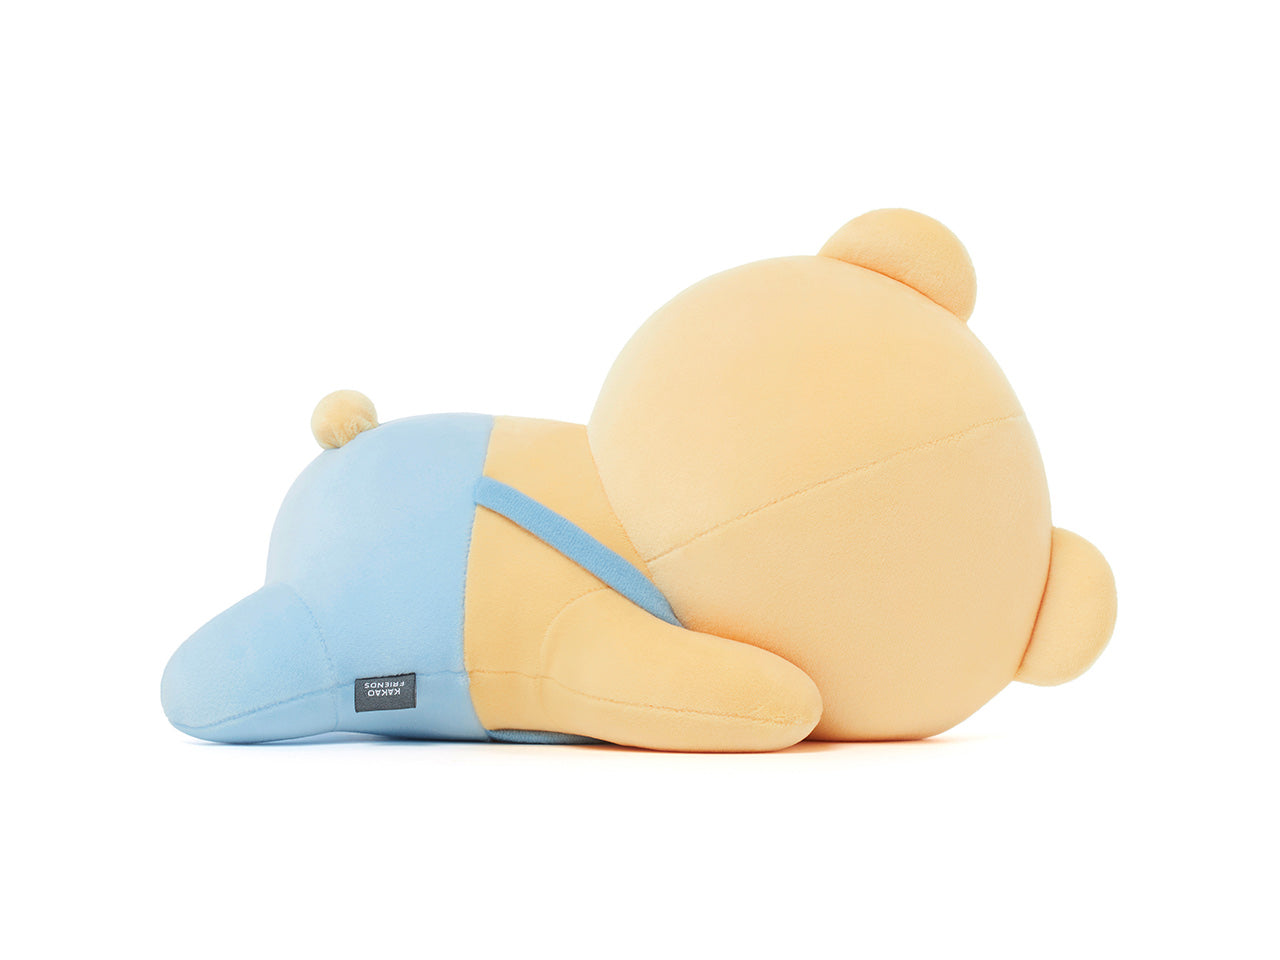 kakao friends ryan in skyblue overall plush toy back